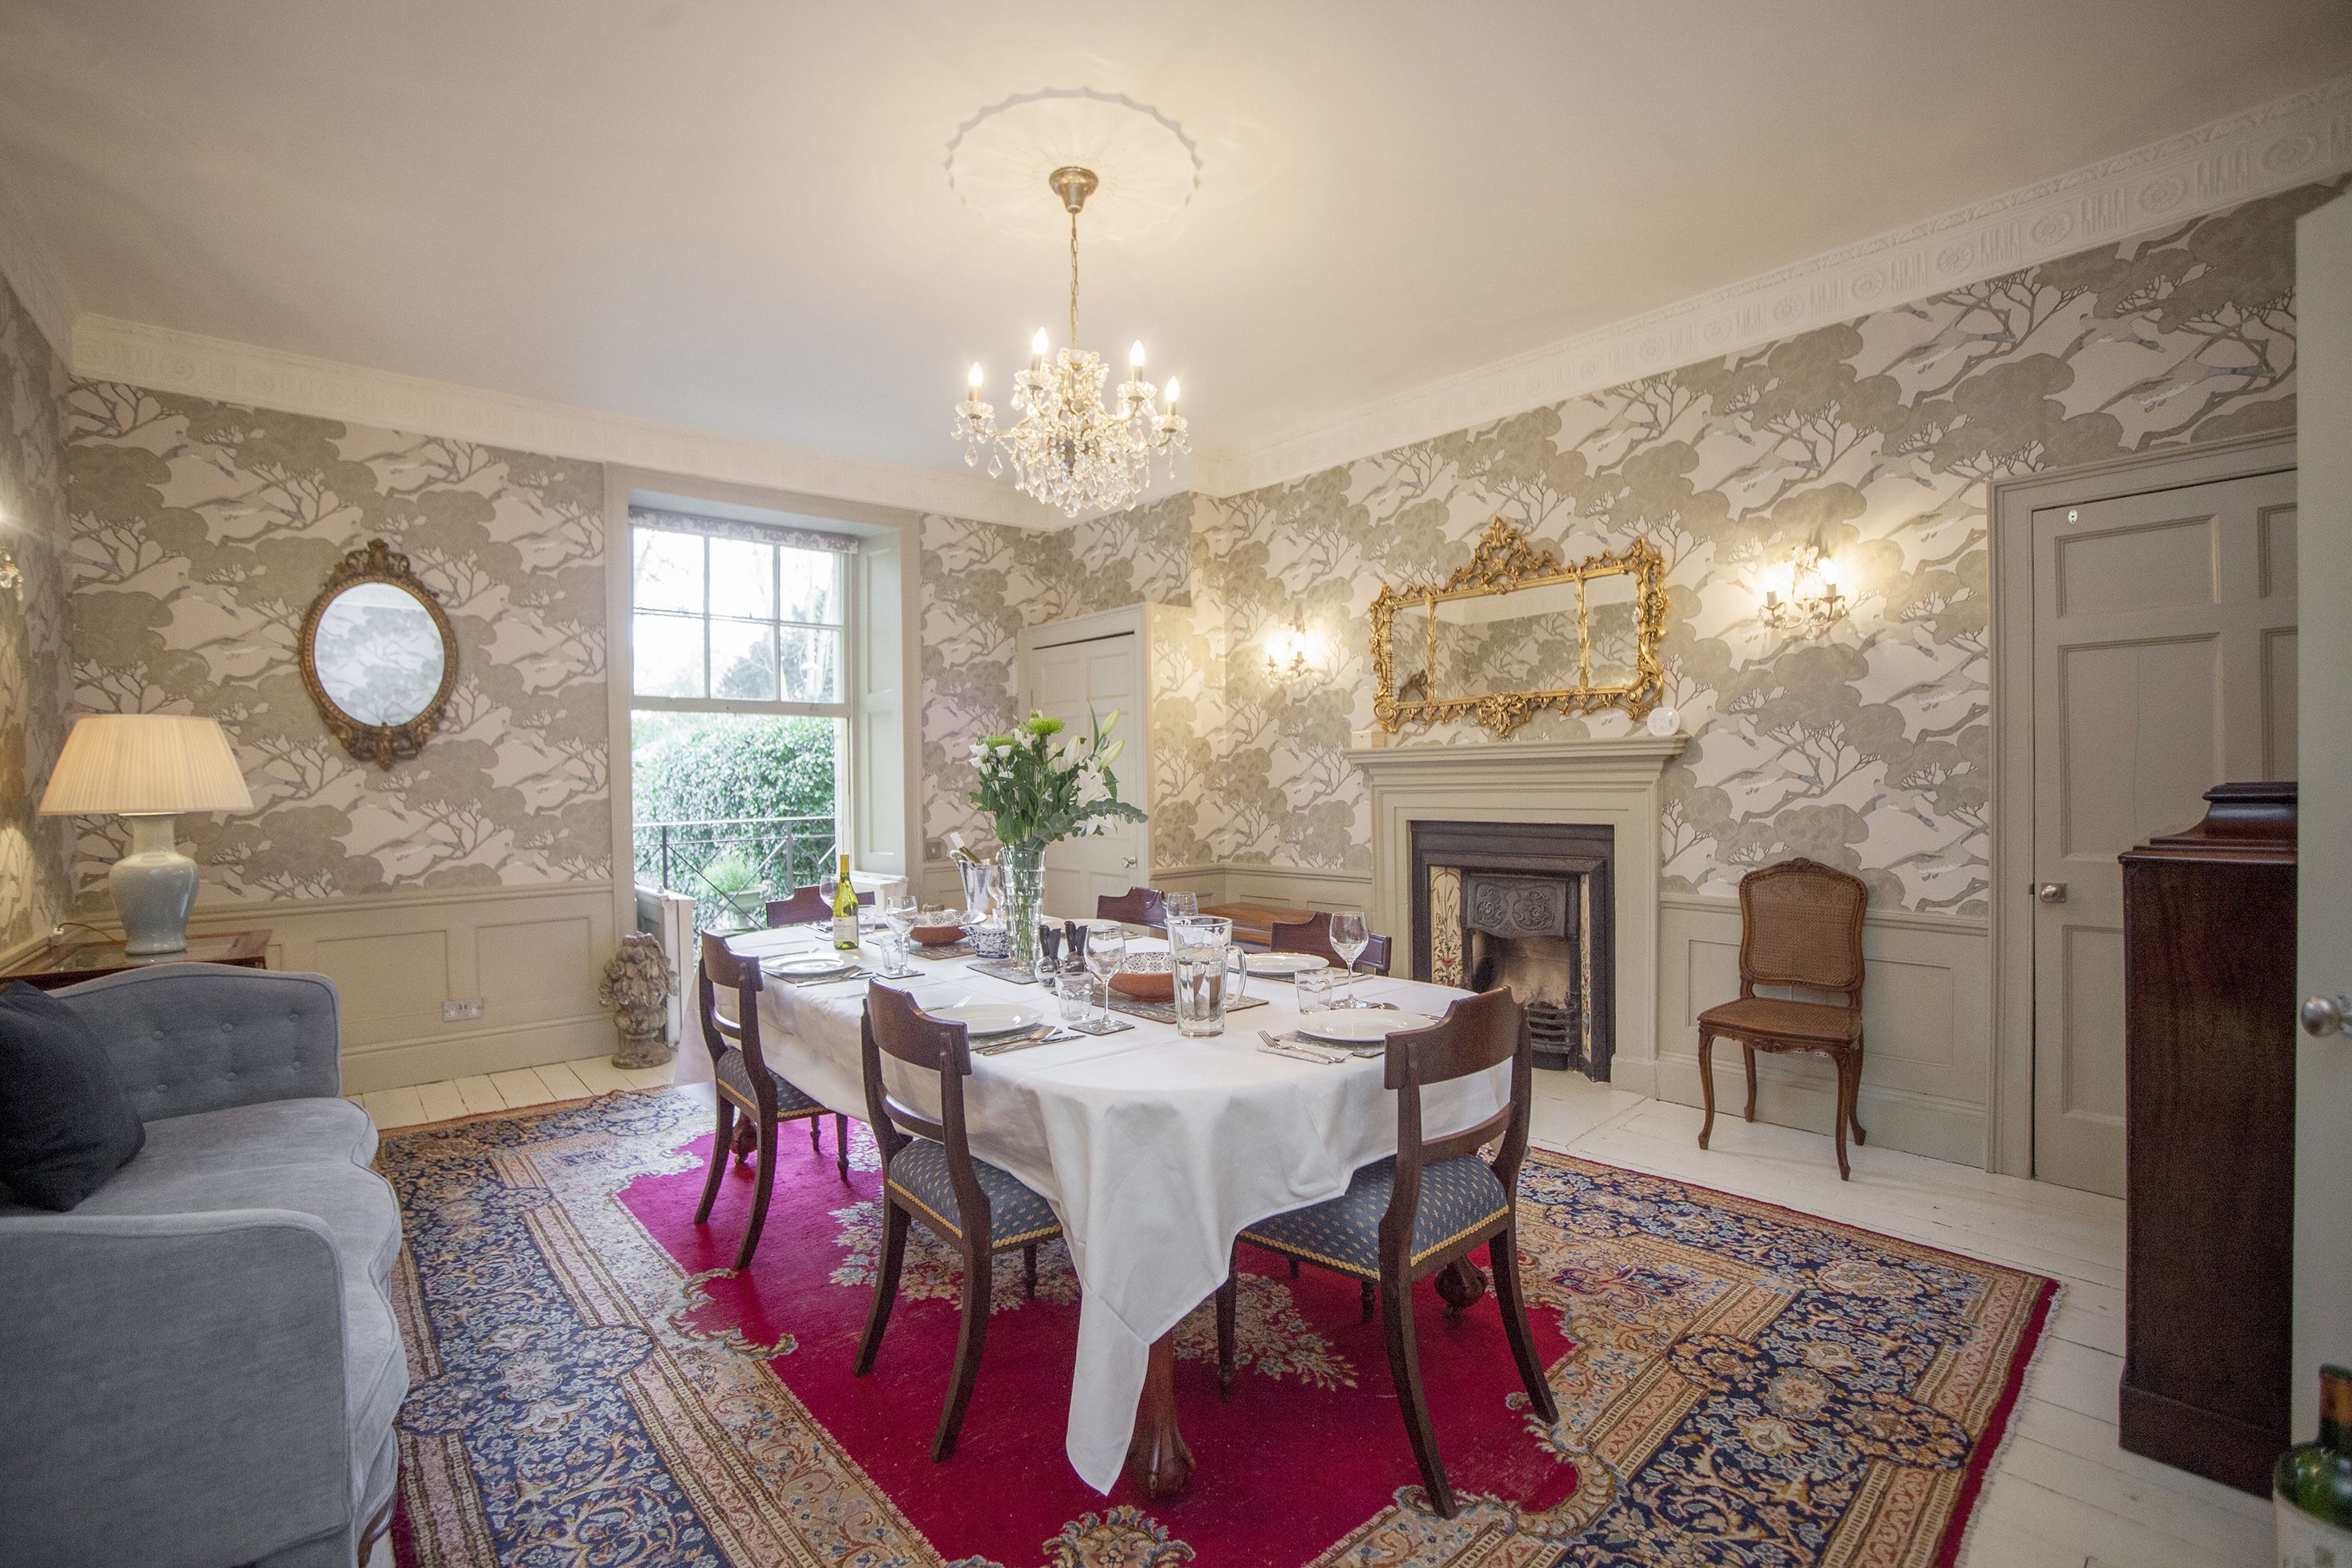 Dining room with sash window leading to wrought iron balcony and steps to courtyard